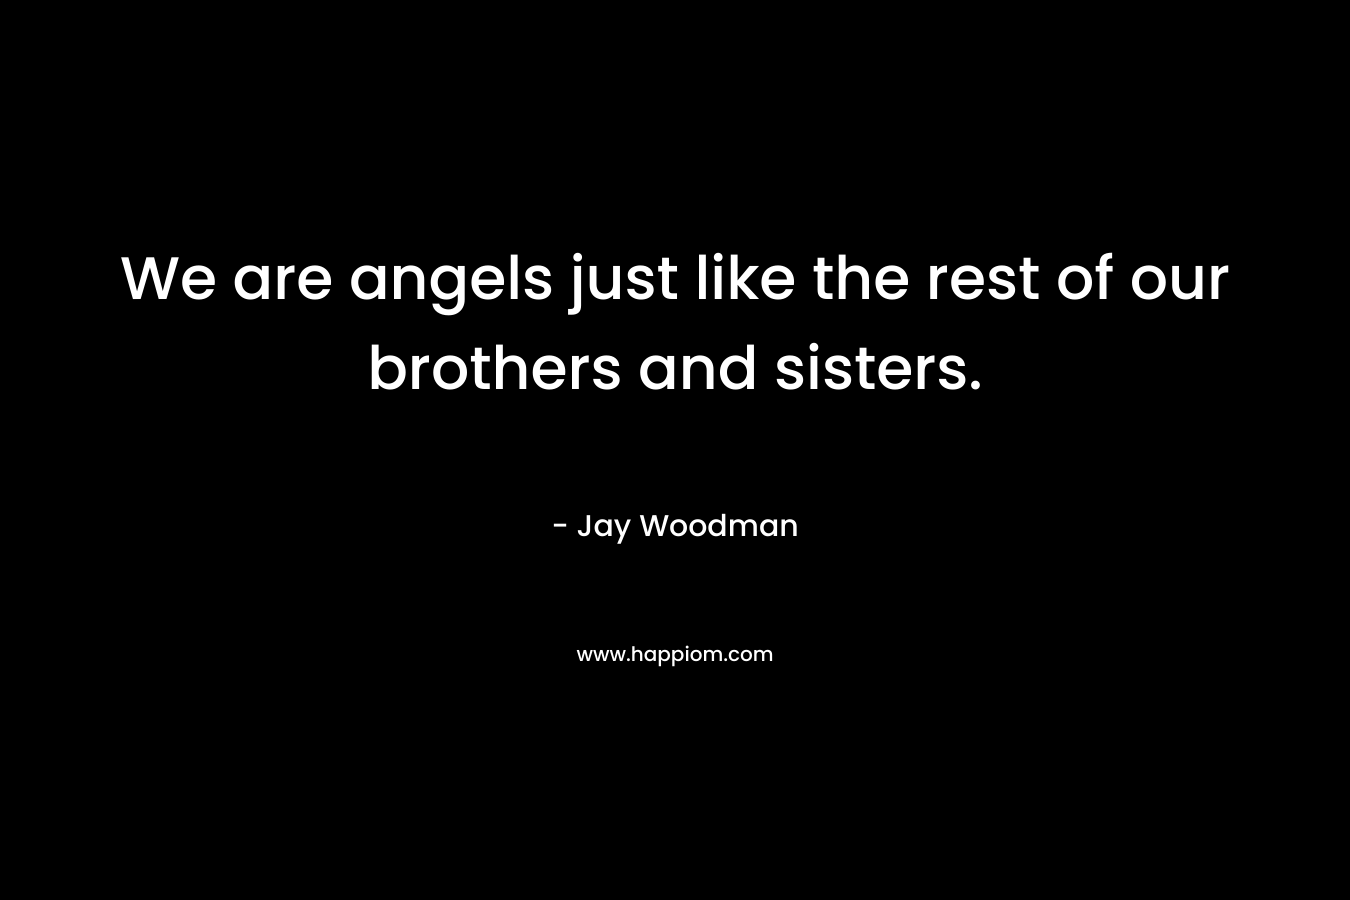 We are angels just like the rest of our brothers and sisters. – Jay Woodman